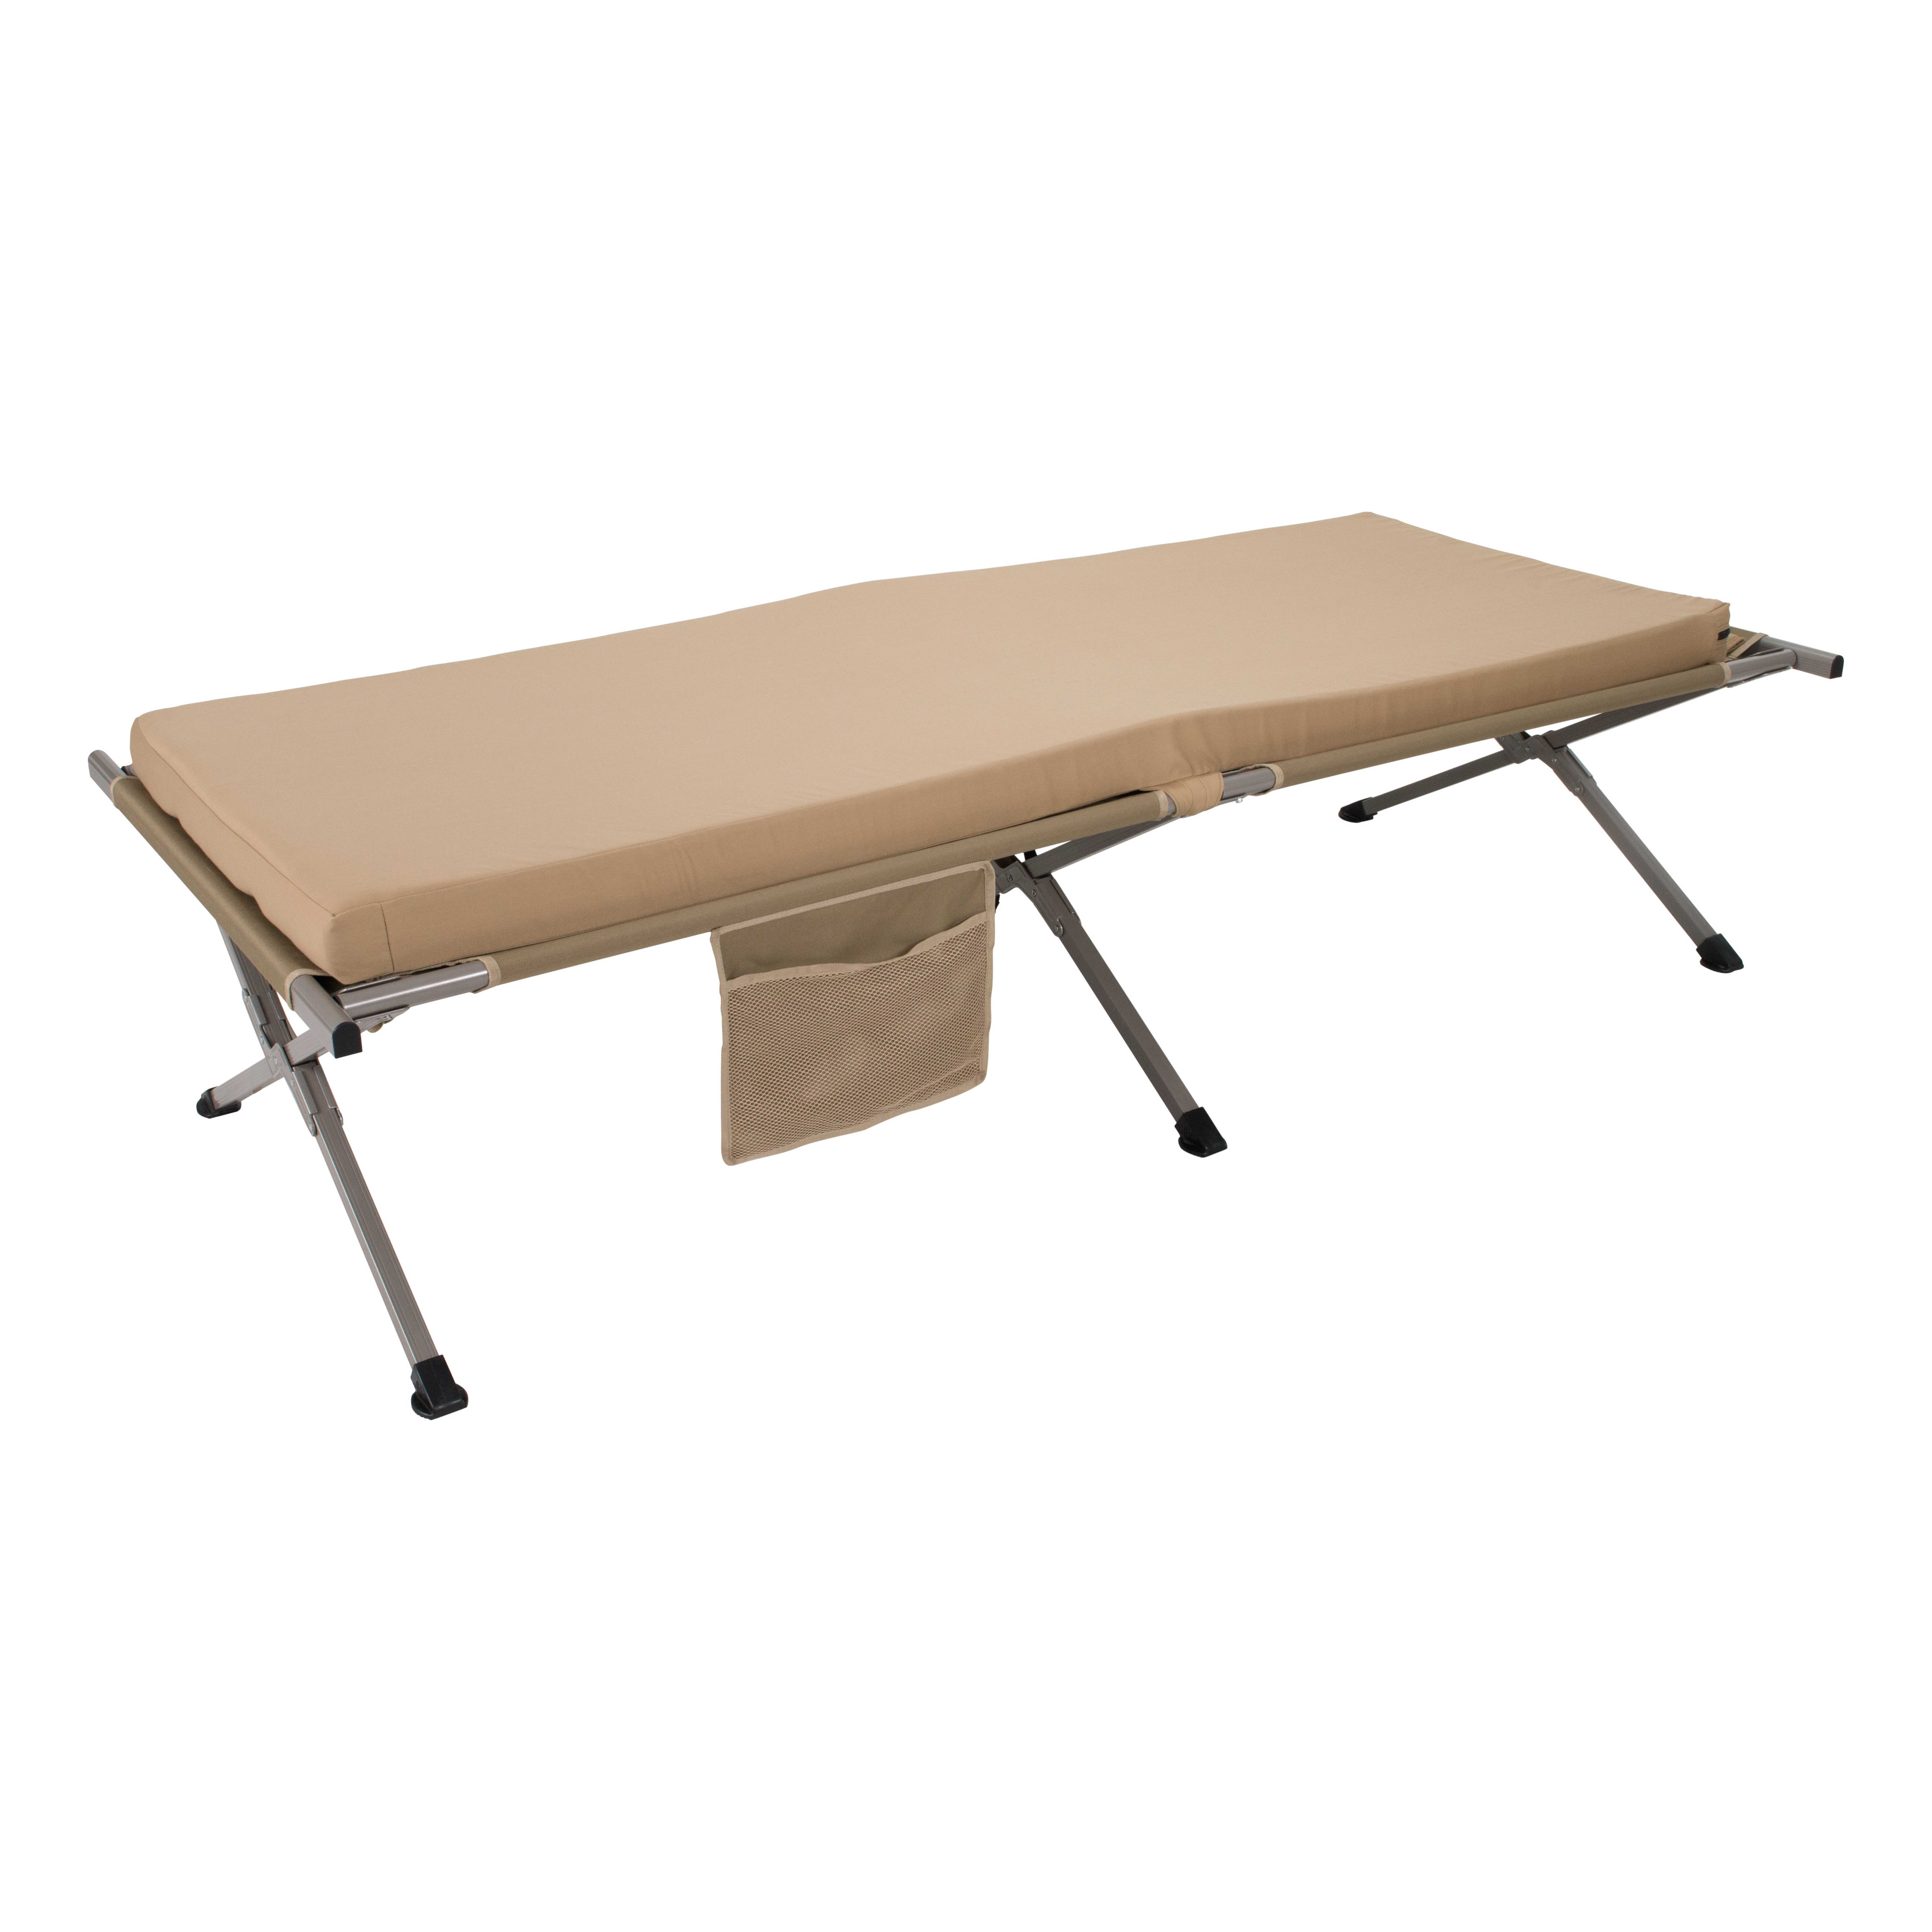 Cabela's Deluxe Cot Pad